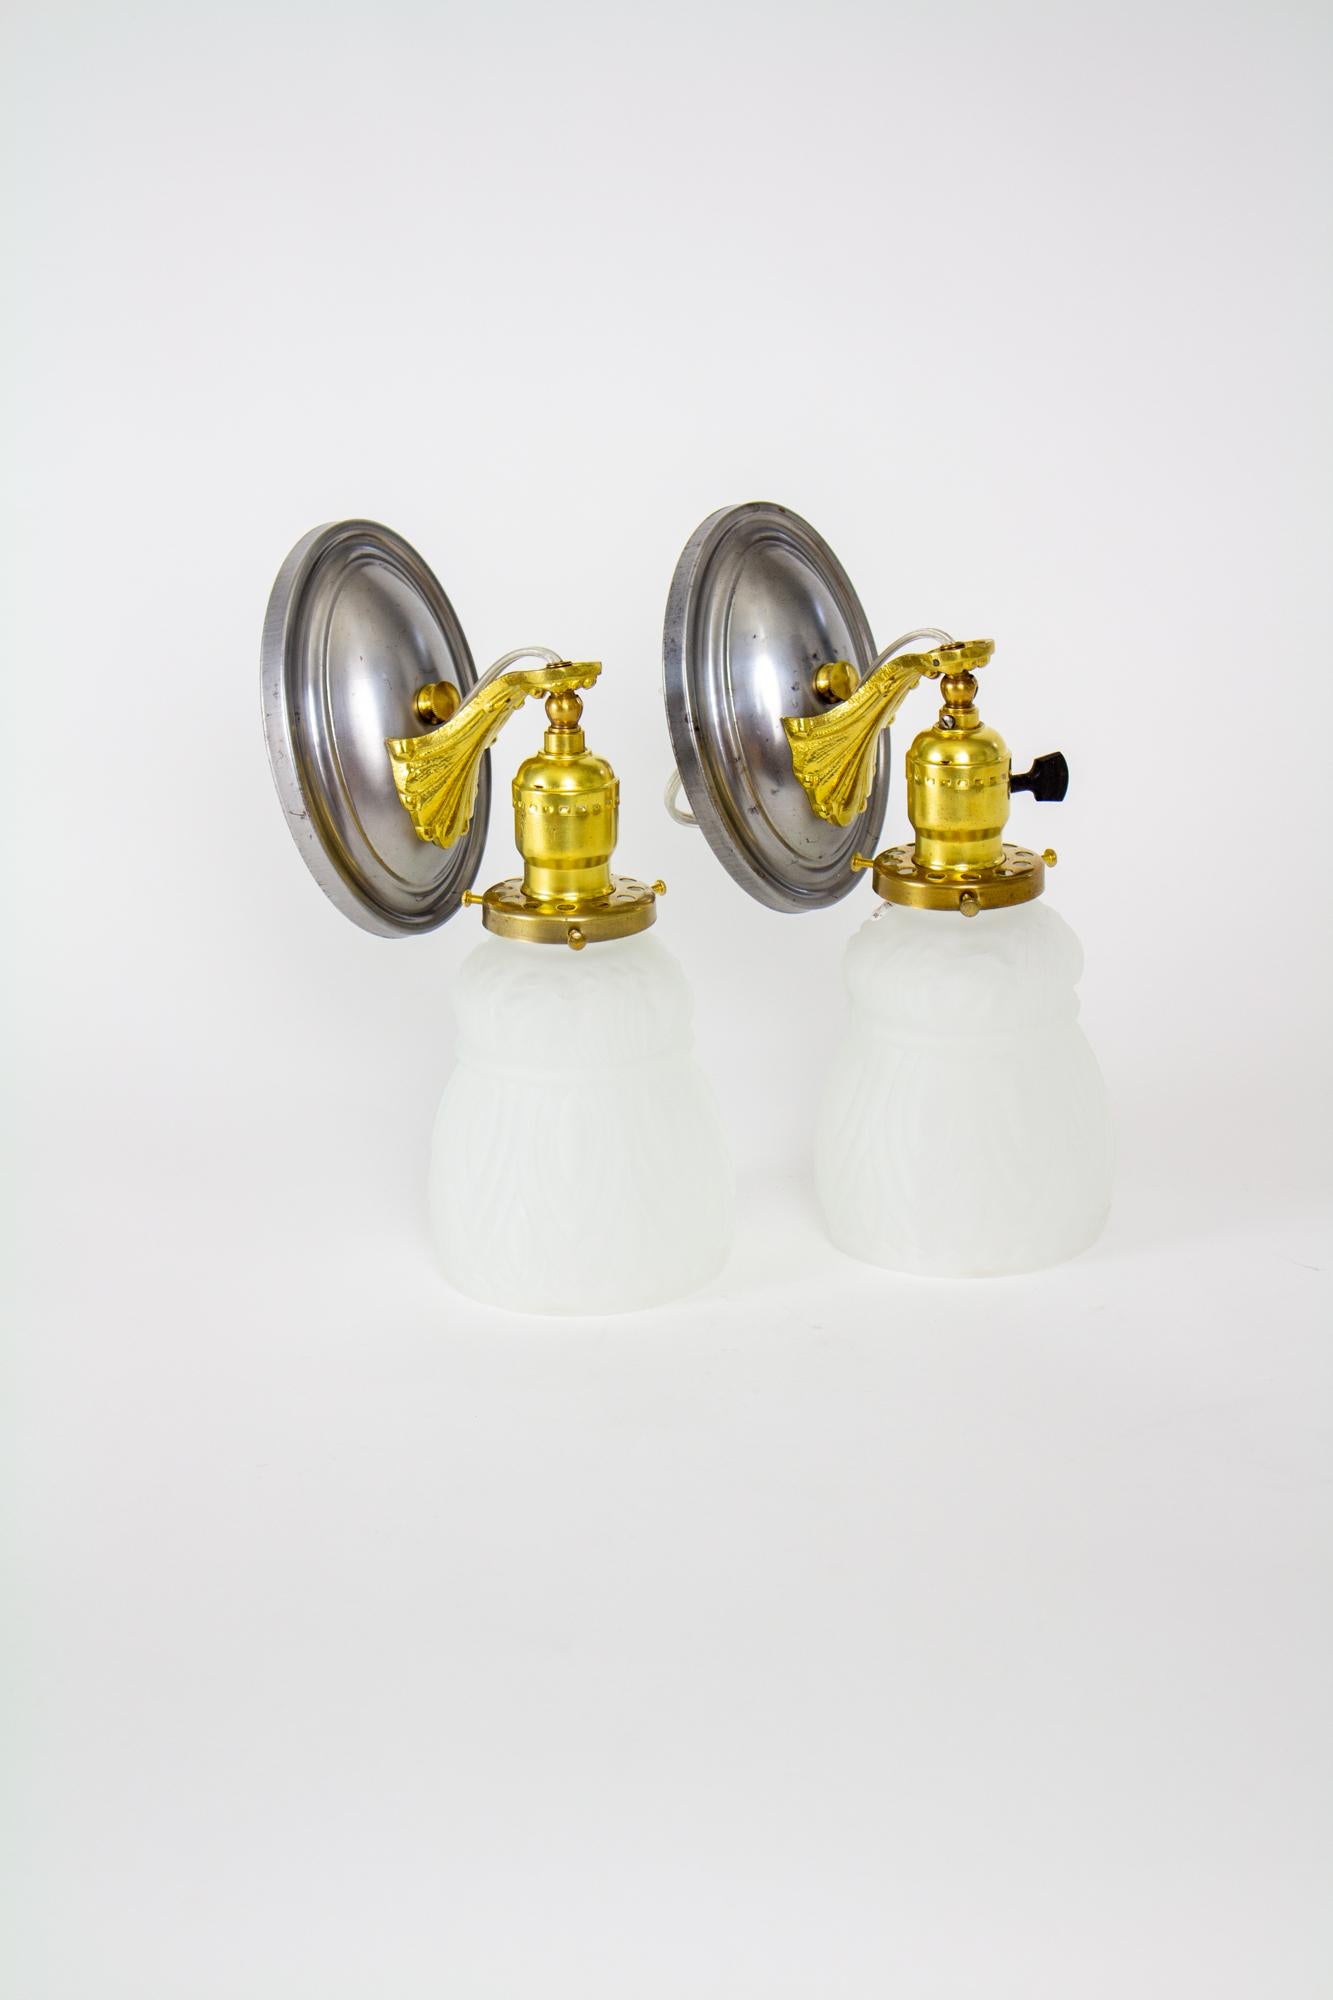 American Classical Early 20th Century Mixed Metal Revival Sconces with Frosted Glass - a Pair For Sale